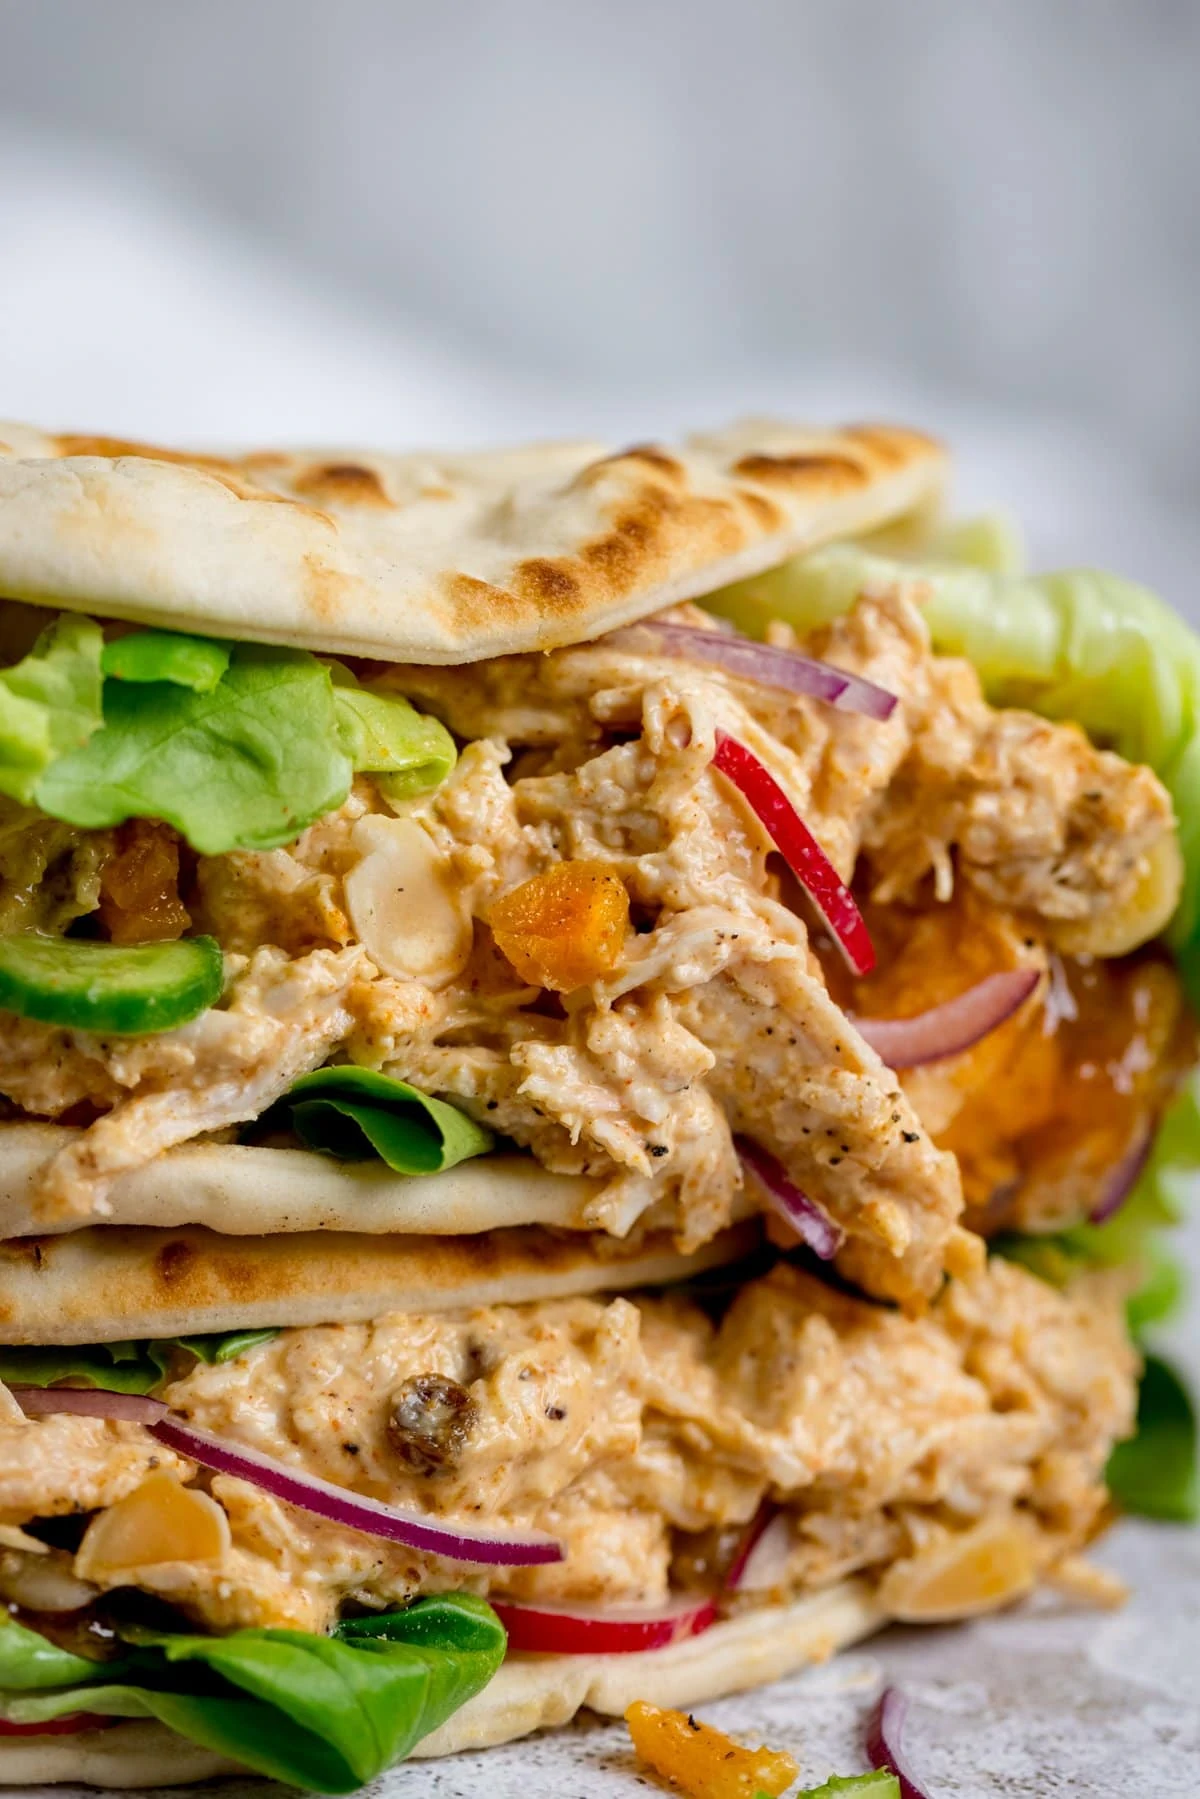 Close up image of coronation chicken and salad on a folded flatbread, stacked on another flatbread, against a light background.